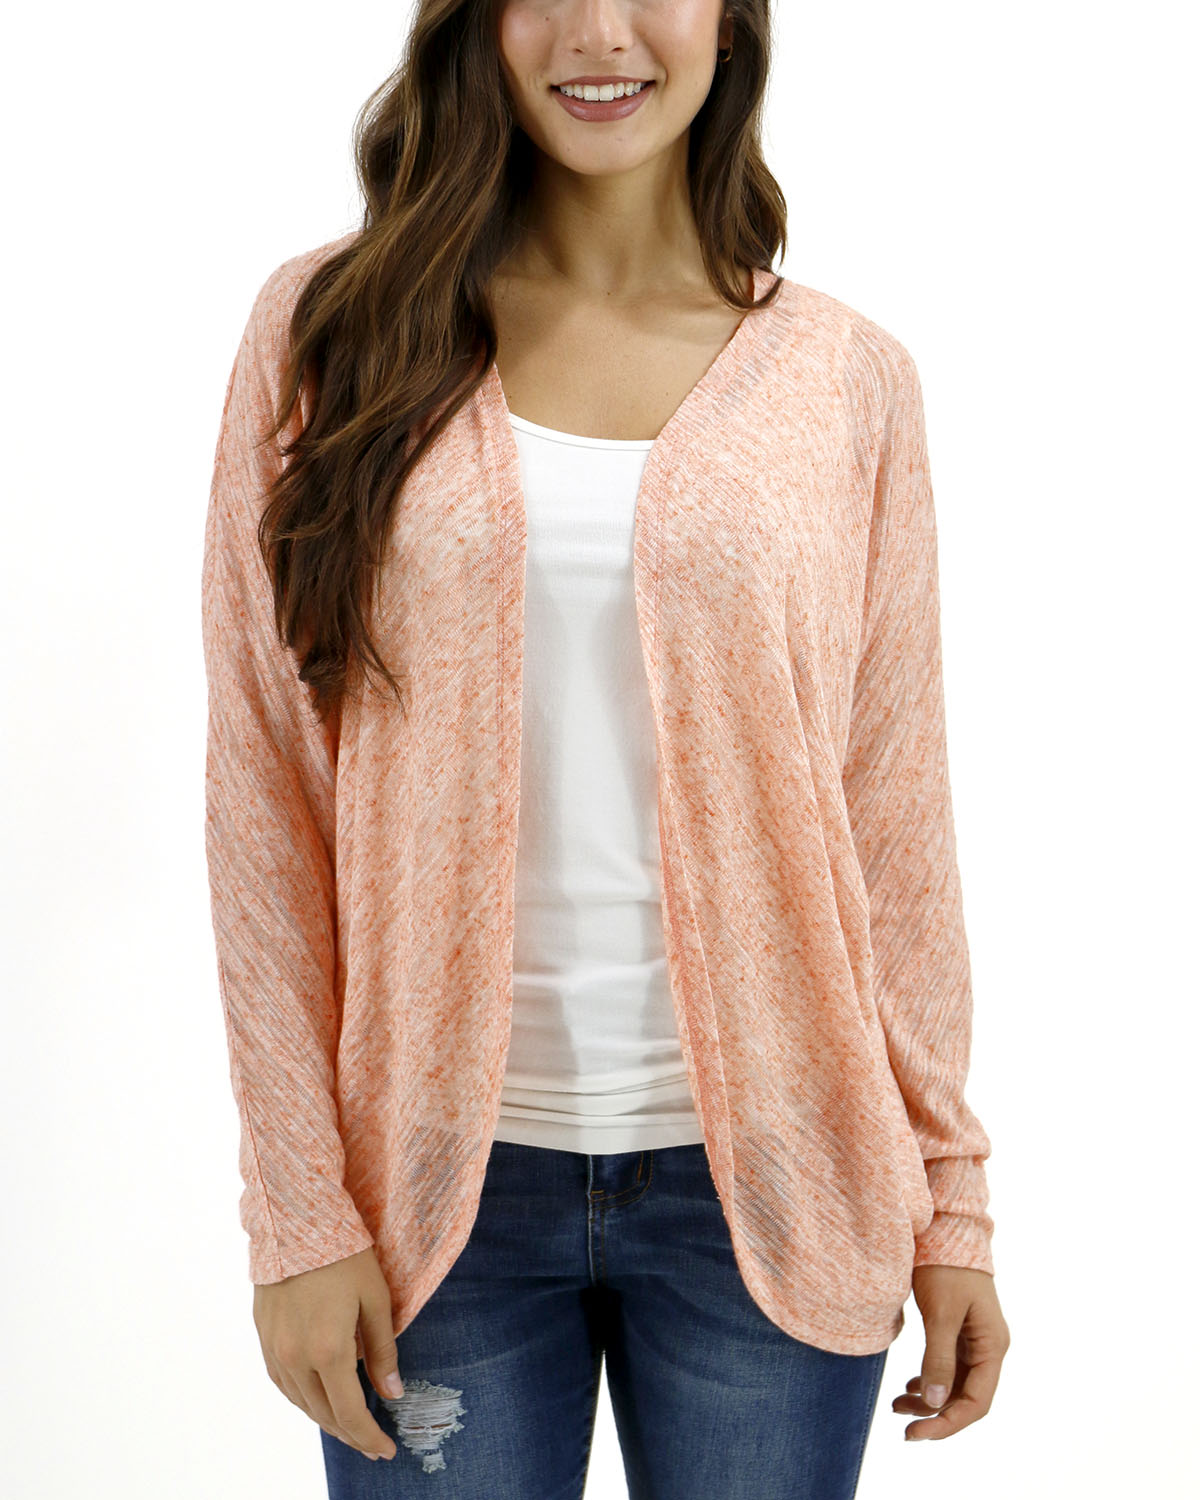 Slub in Cardigan SALE Dreamsicle and Airy Lace - FINAL Grace Cocoon -